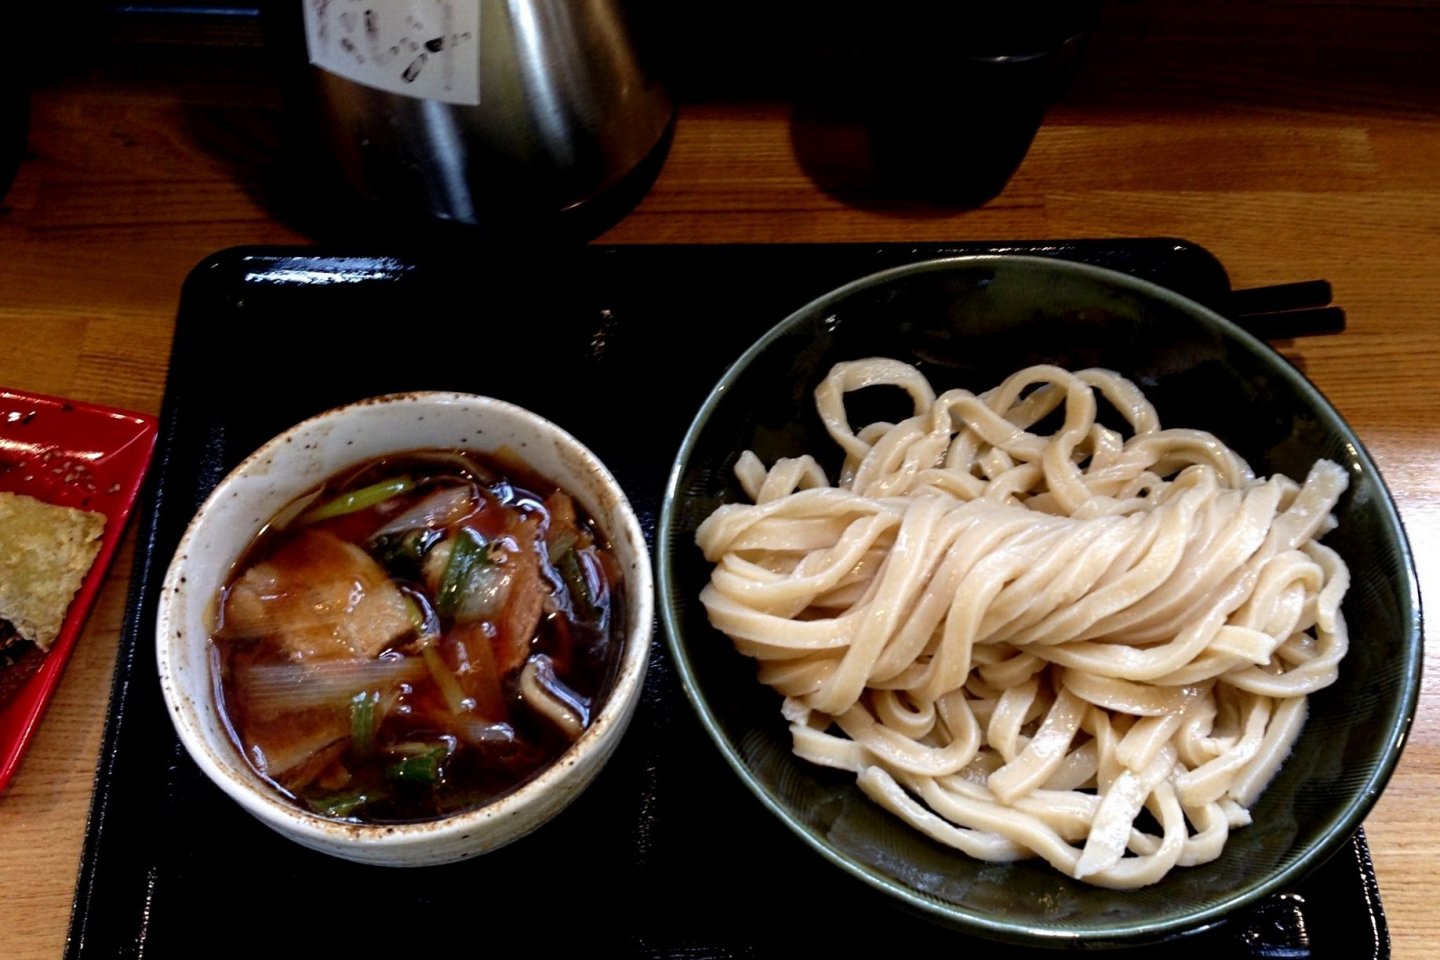 Meat soup and udon